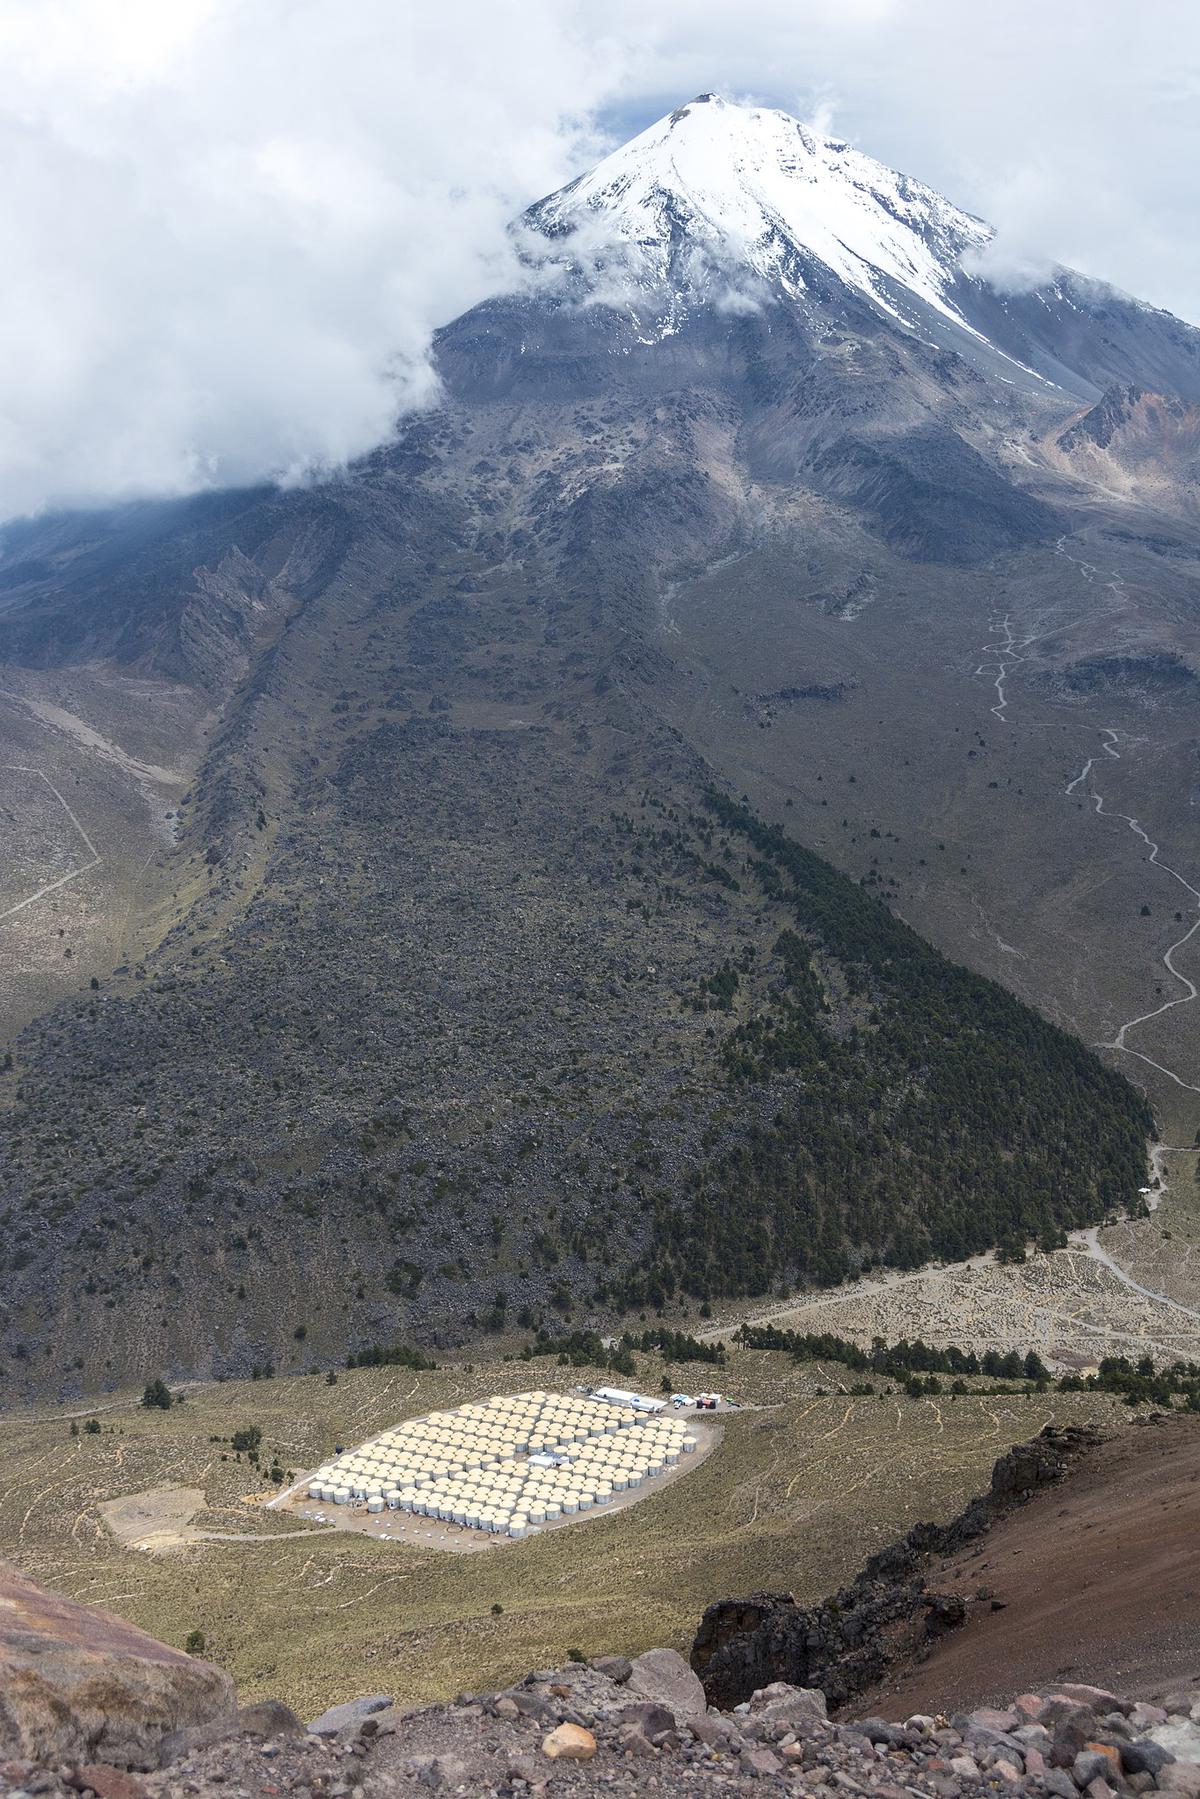 The HAWC detector is visible in the bottom-foreground under the peak of Mexico’s highest mountain, Pico de Orizaba, August 19, 2014.